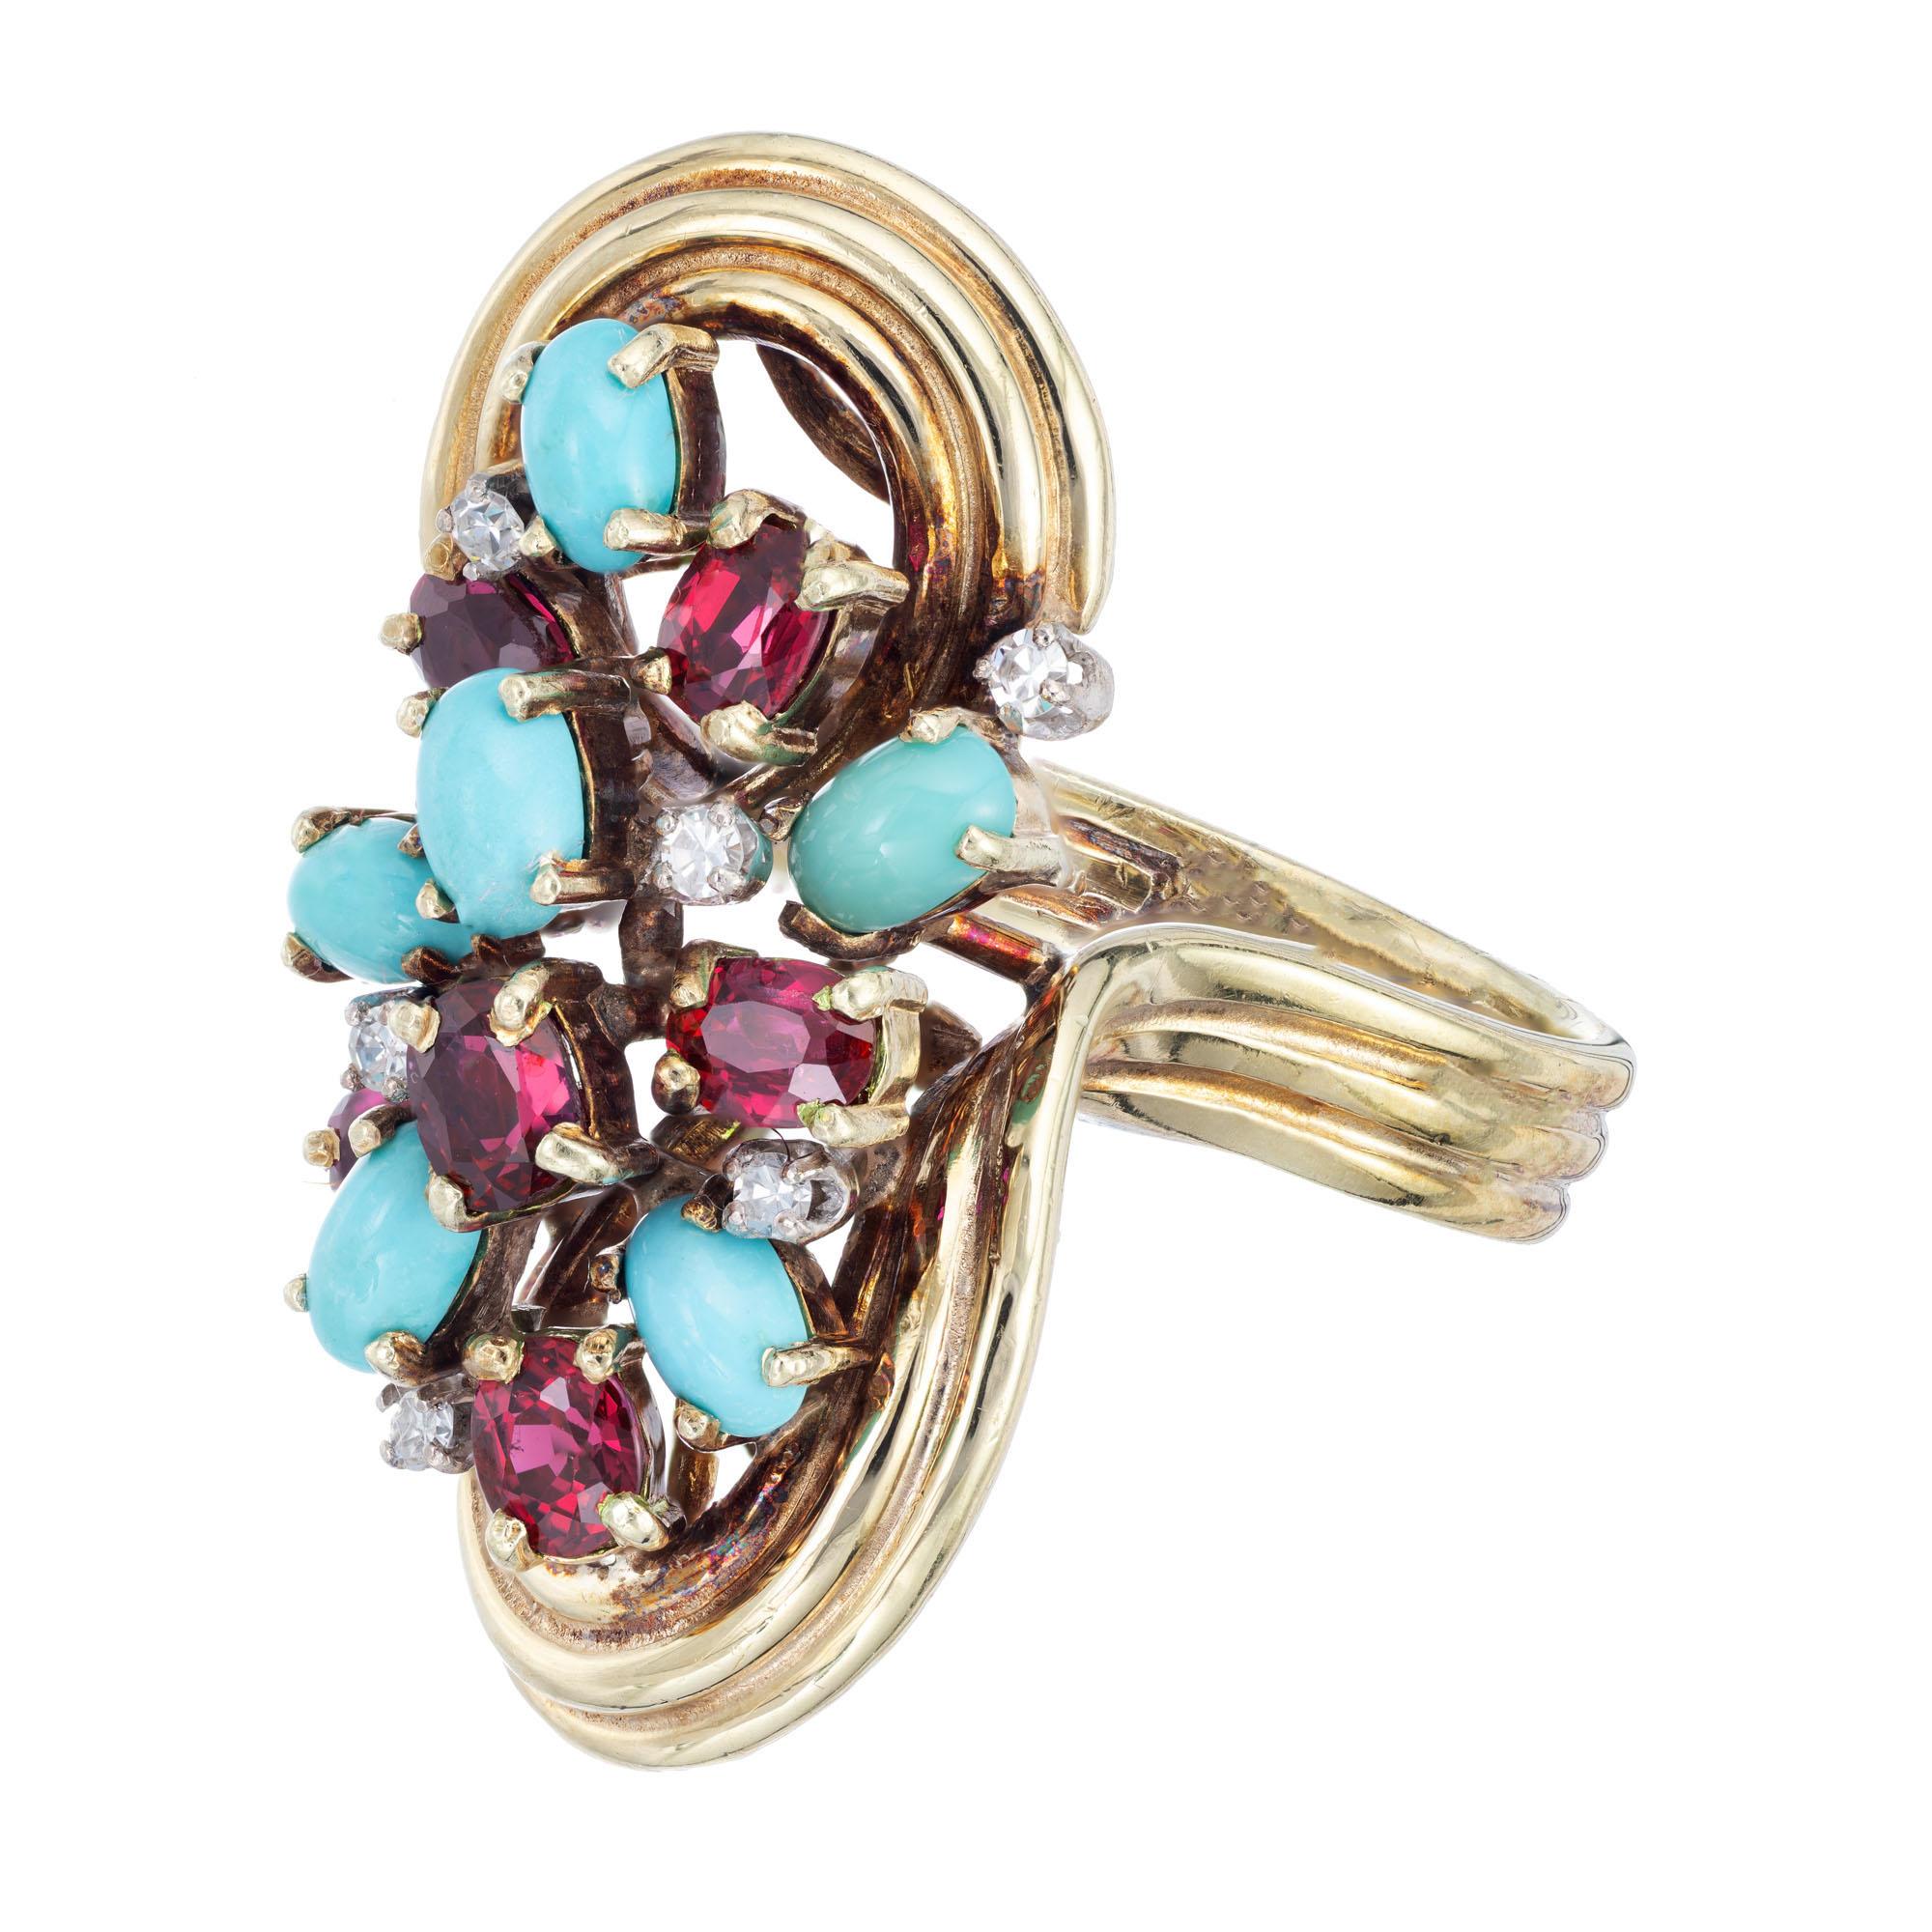 1960's Oval turquoise and rubies with round diamonds in a 14k yellow gold cocktail ring setting. 

6 round diamonds approx. total weight .18cts, G, VS
7 oval rubies approx total weight 2.10cts
6 oval turquoise approx total weight 1.80cts
Size 7 and